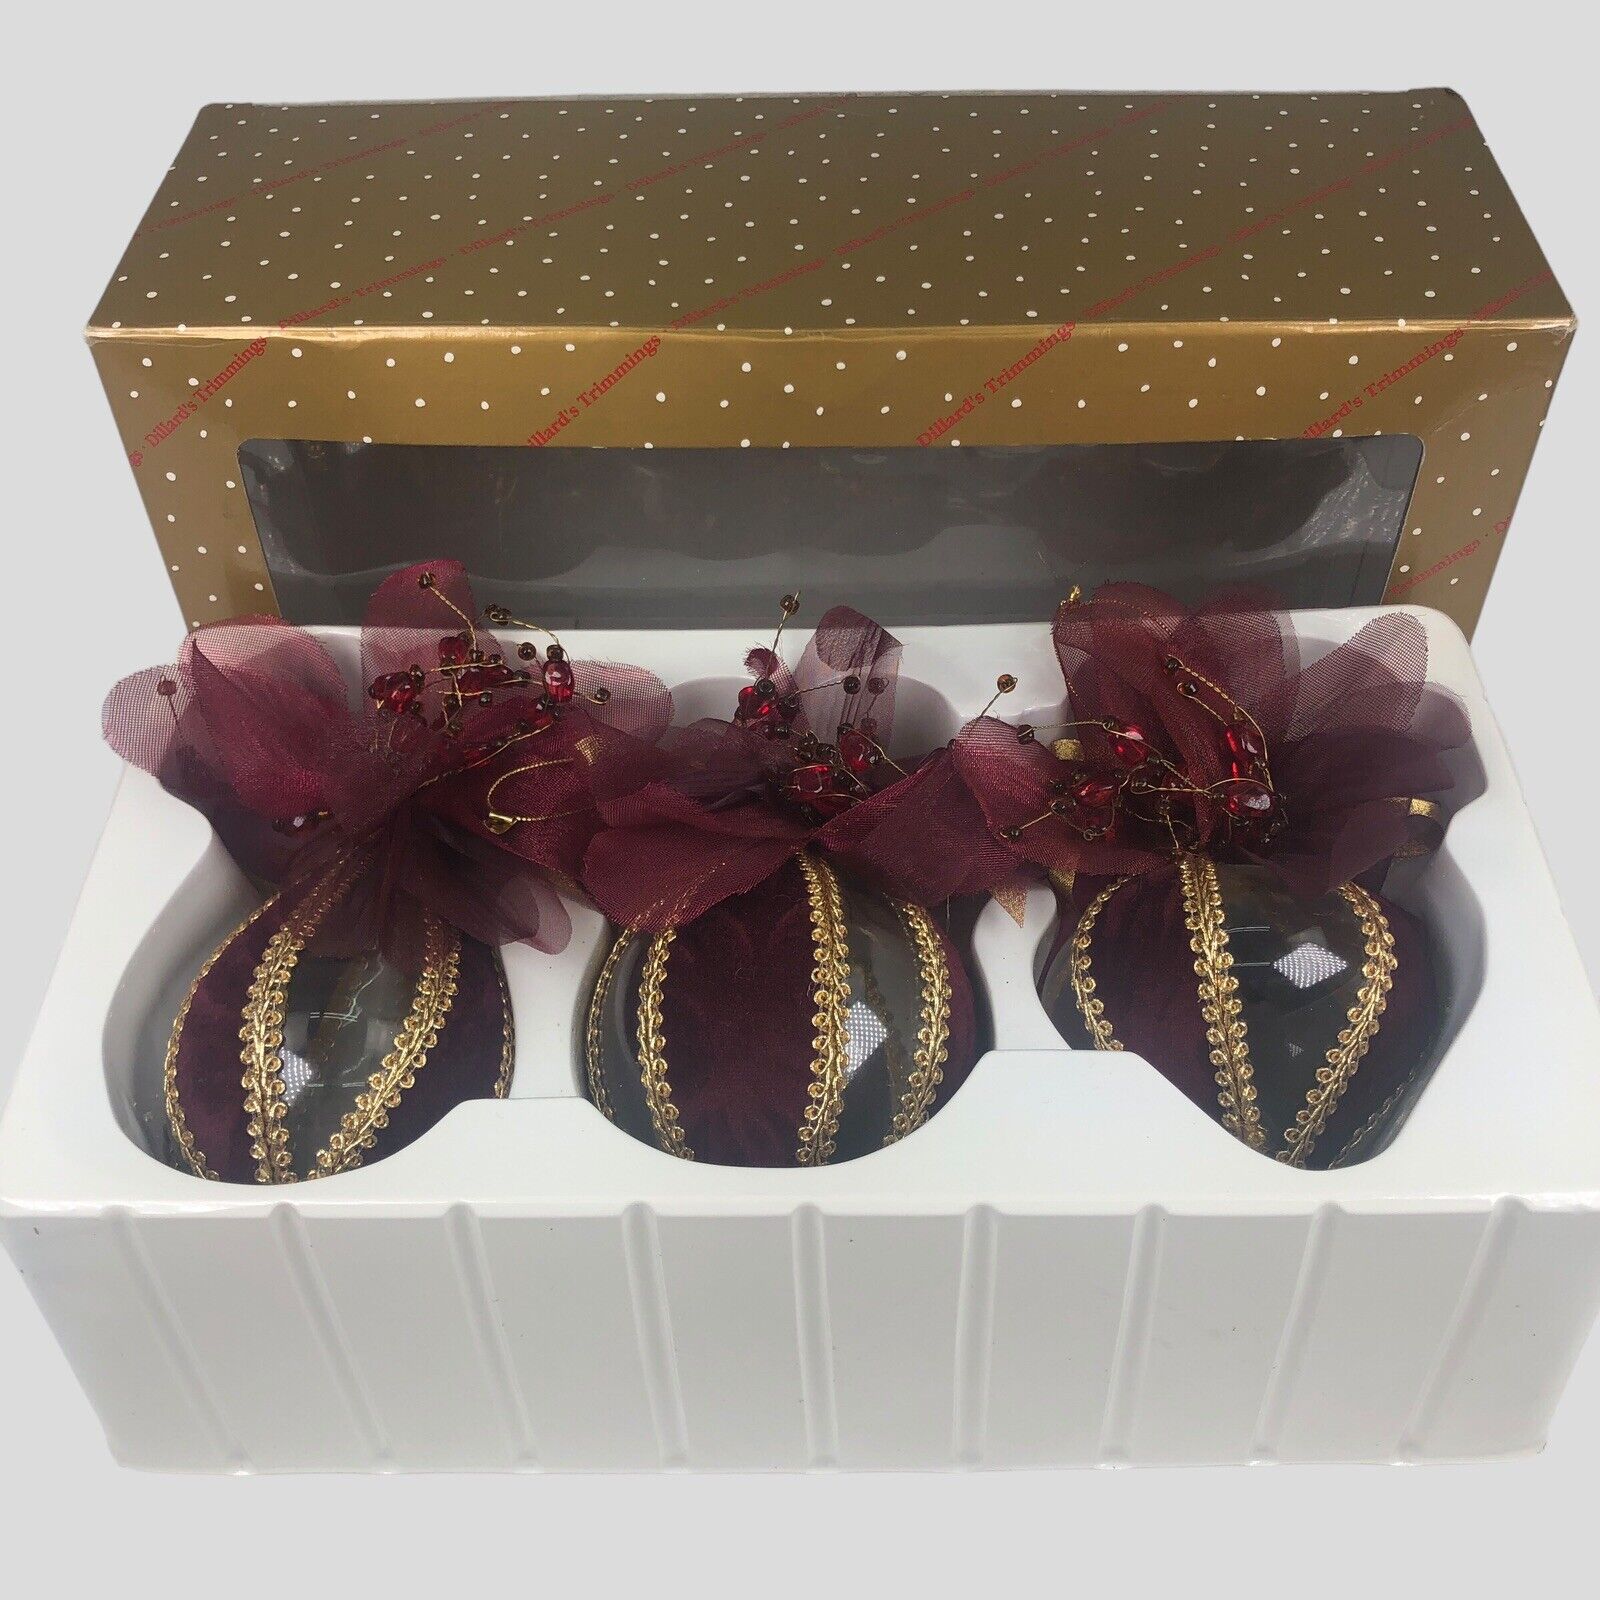 Vintage Dillards Trimmings Ornaments in Box Maroon & Gold 3 Shapes Velvet